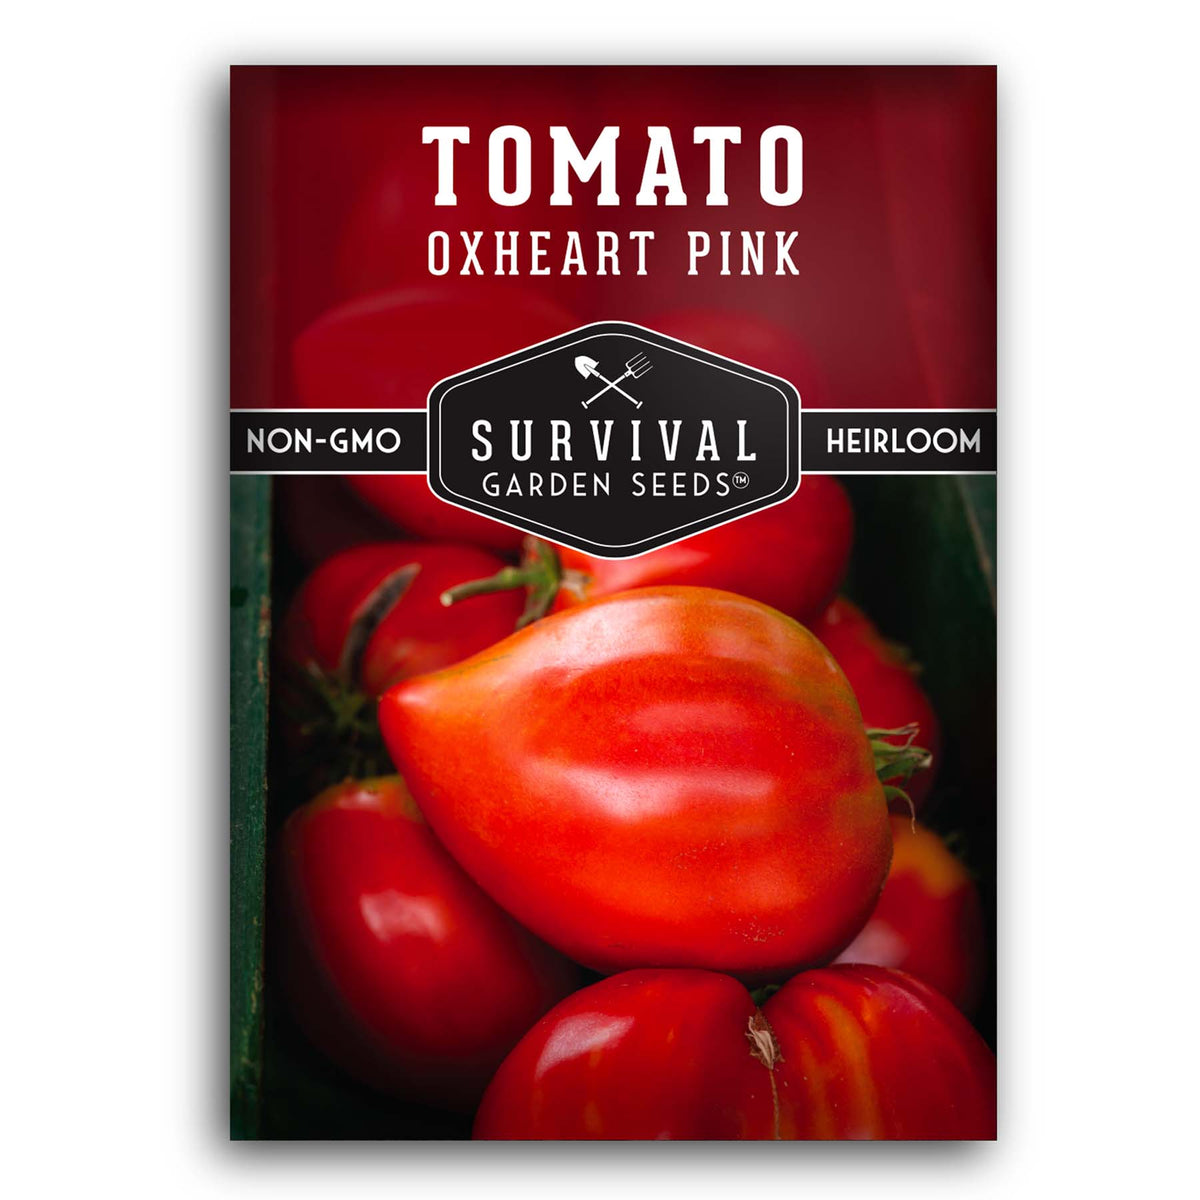 Oxheart Pink Tomato seeds for planting